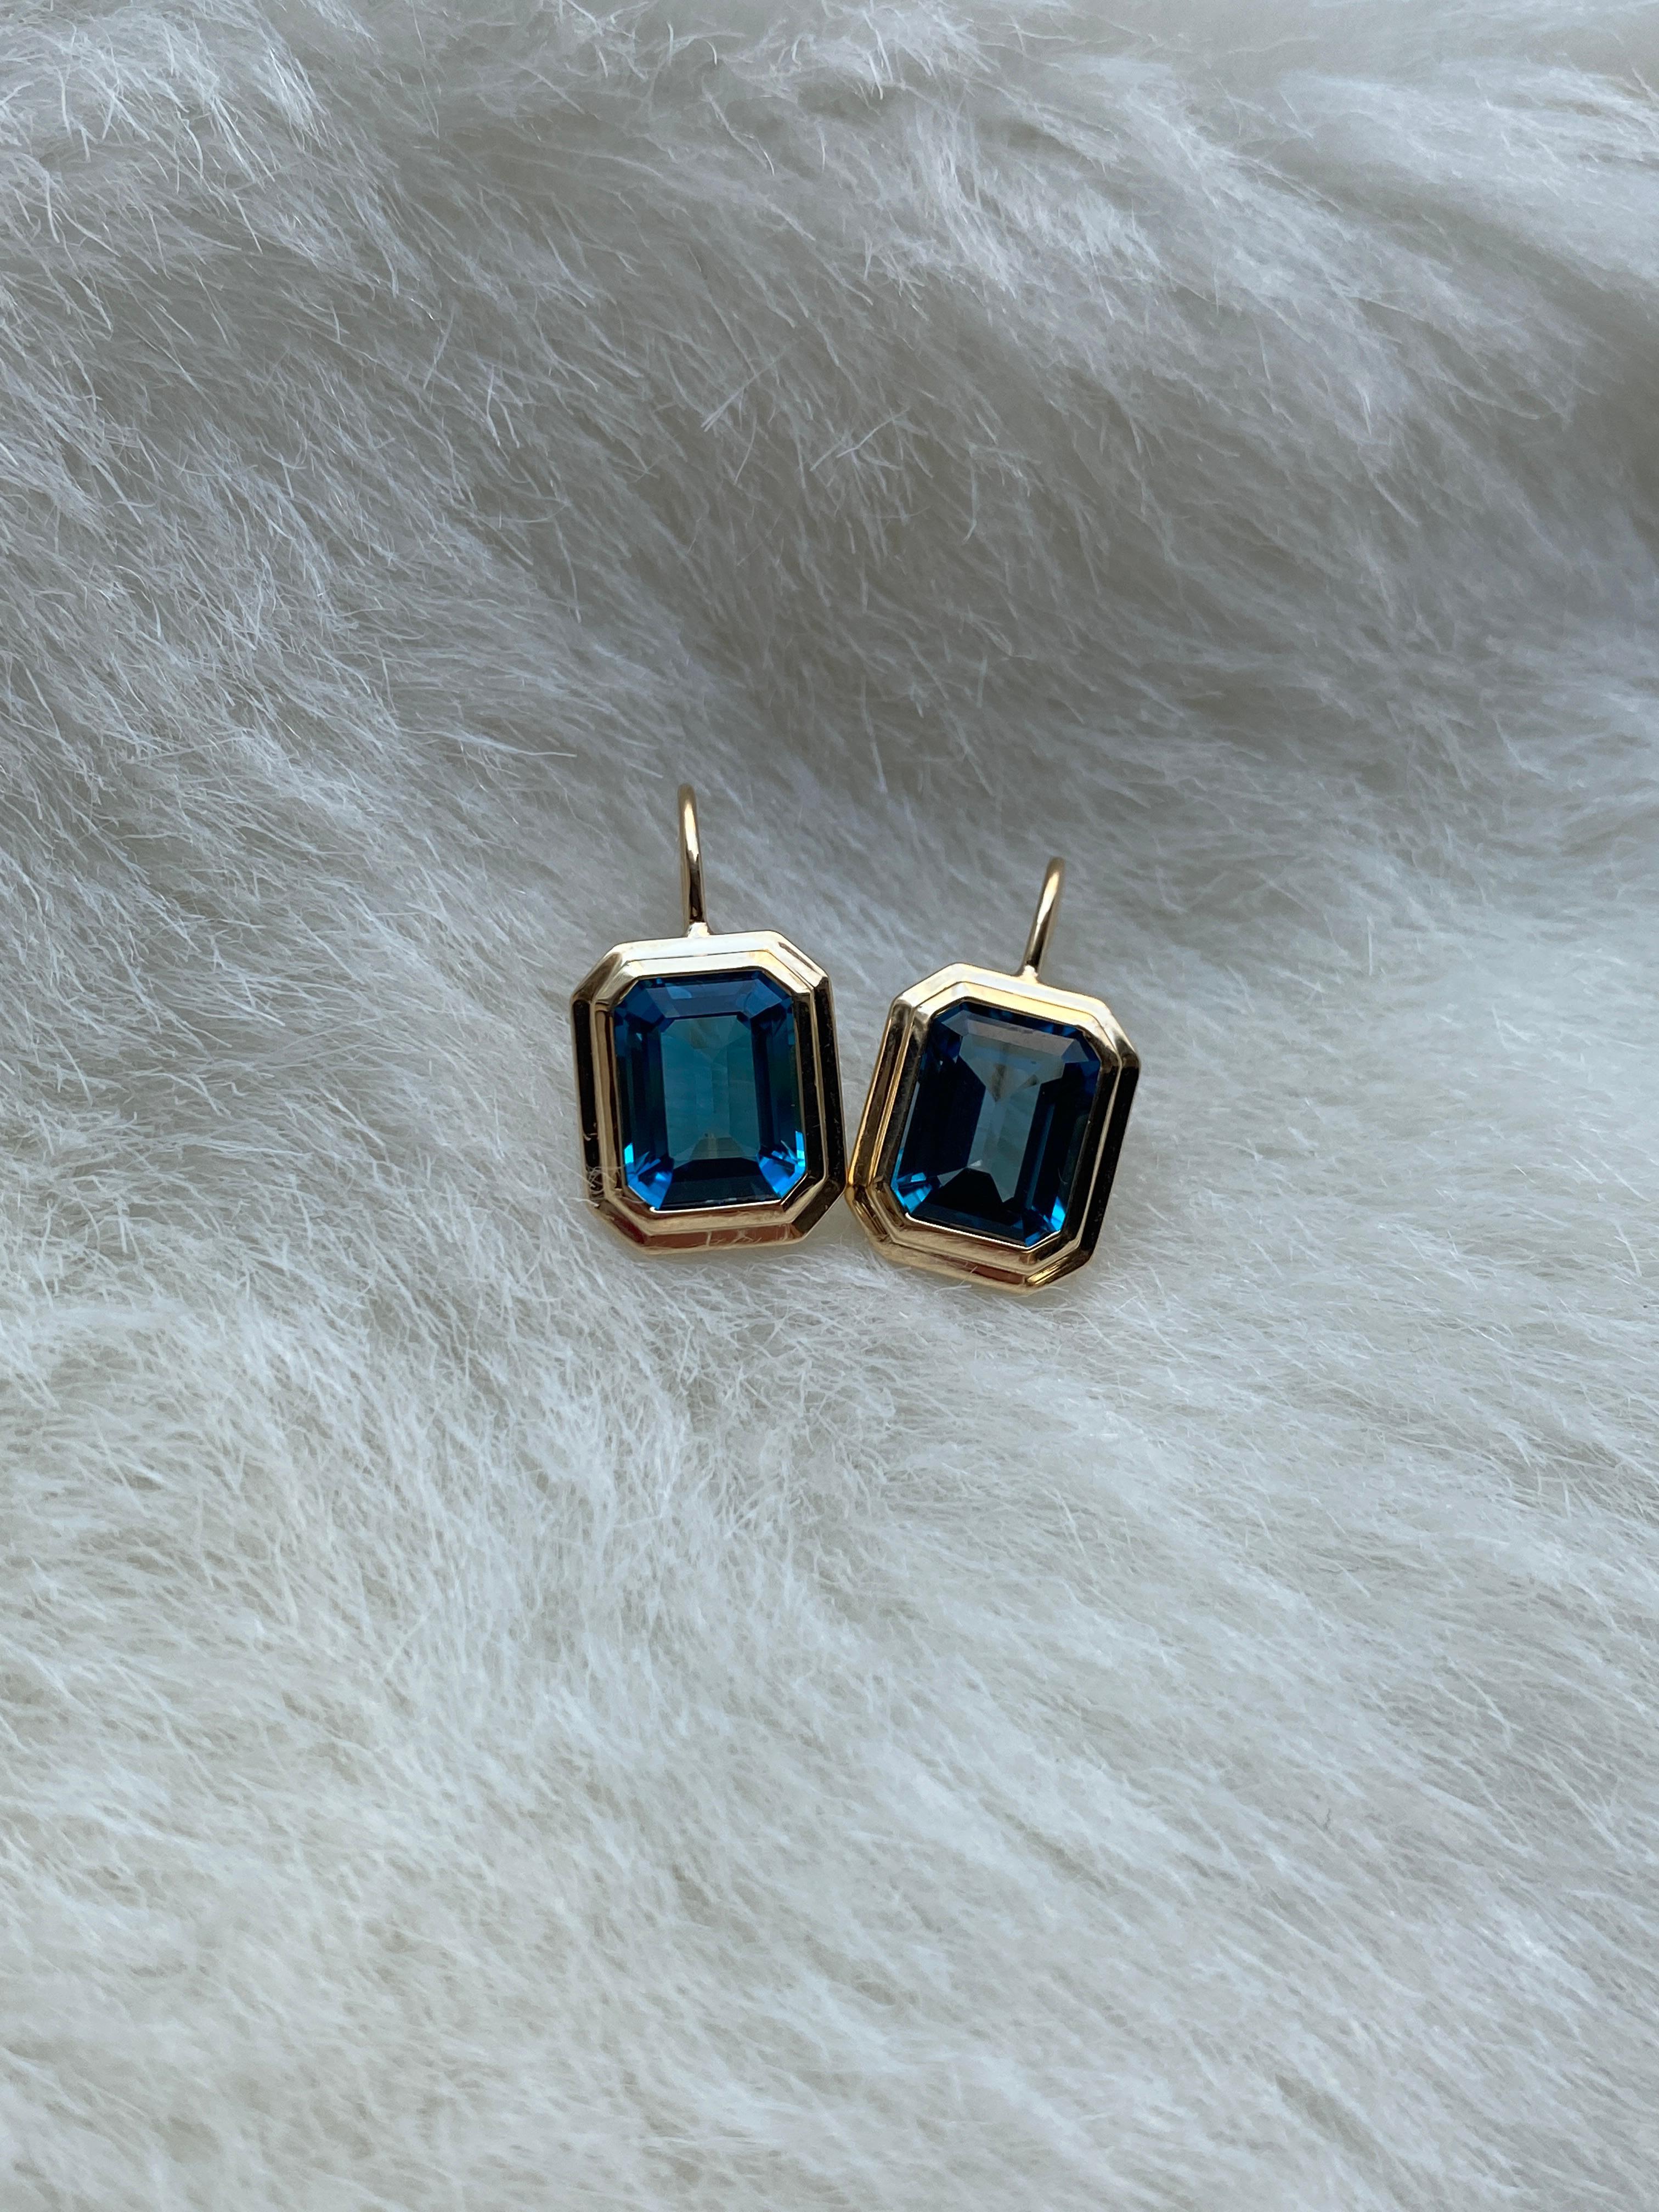 These London Blue Topaz Emerald Cut Bezel Set Earrings on Wire in 18K Yellow Gold from the 'Manhattan Collection are a stunning and sophisticated jewelry piece. These earrings feature exquisite london blue topaz gemstones with an elegant emerald